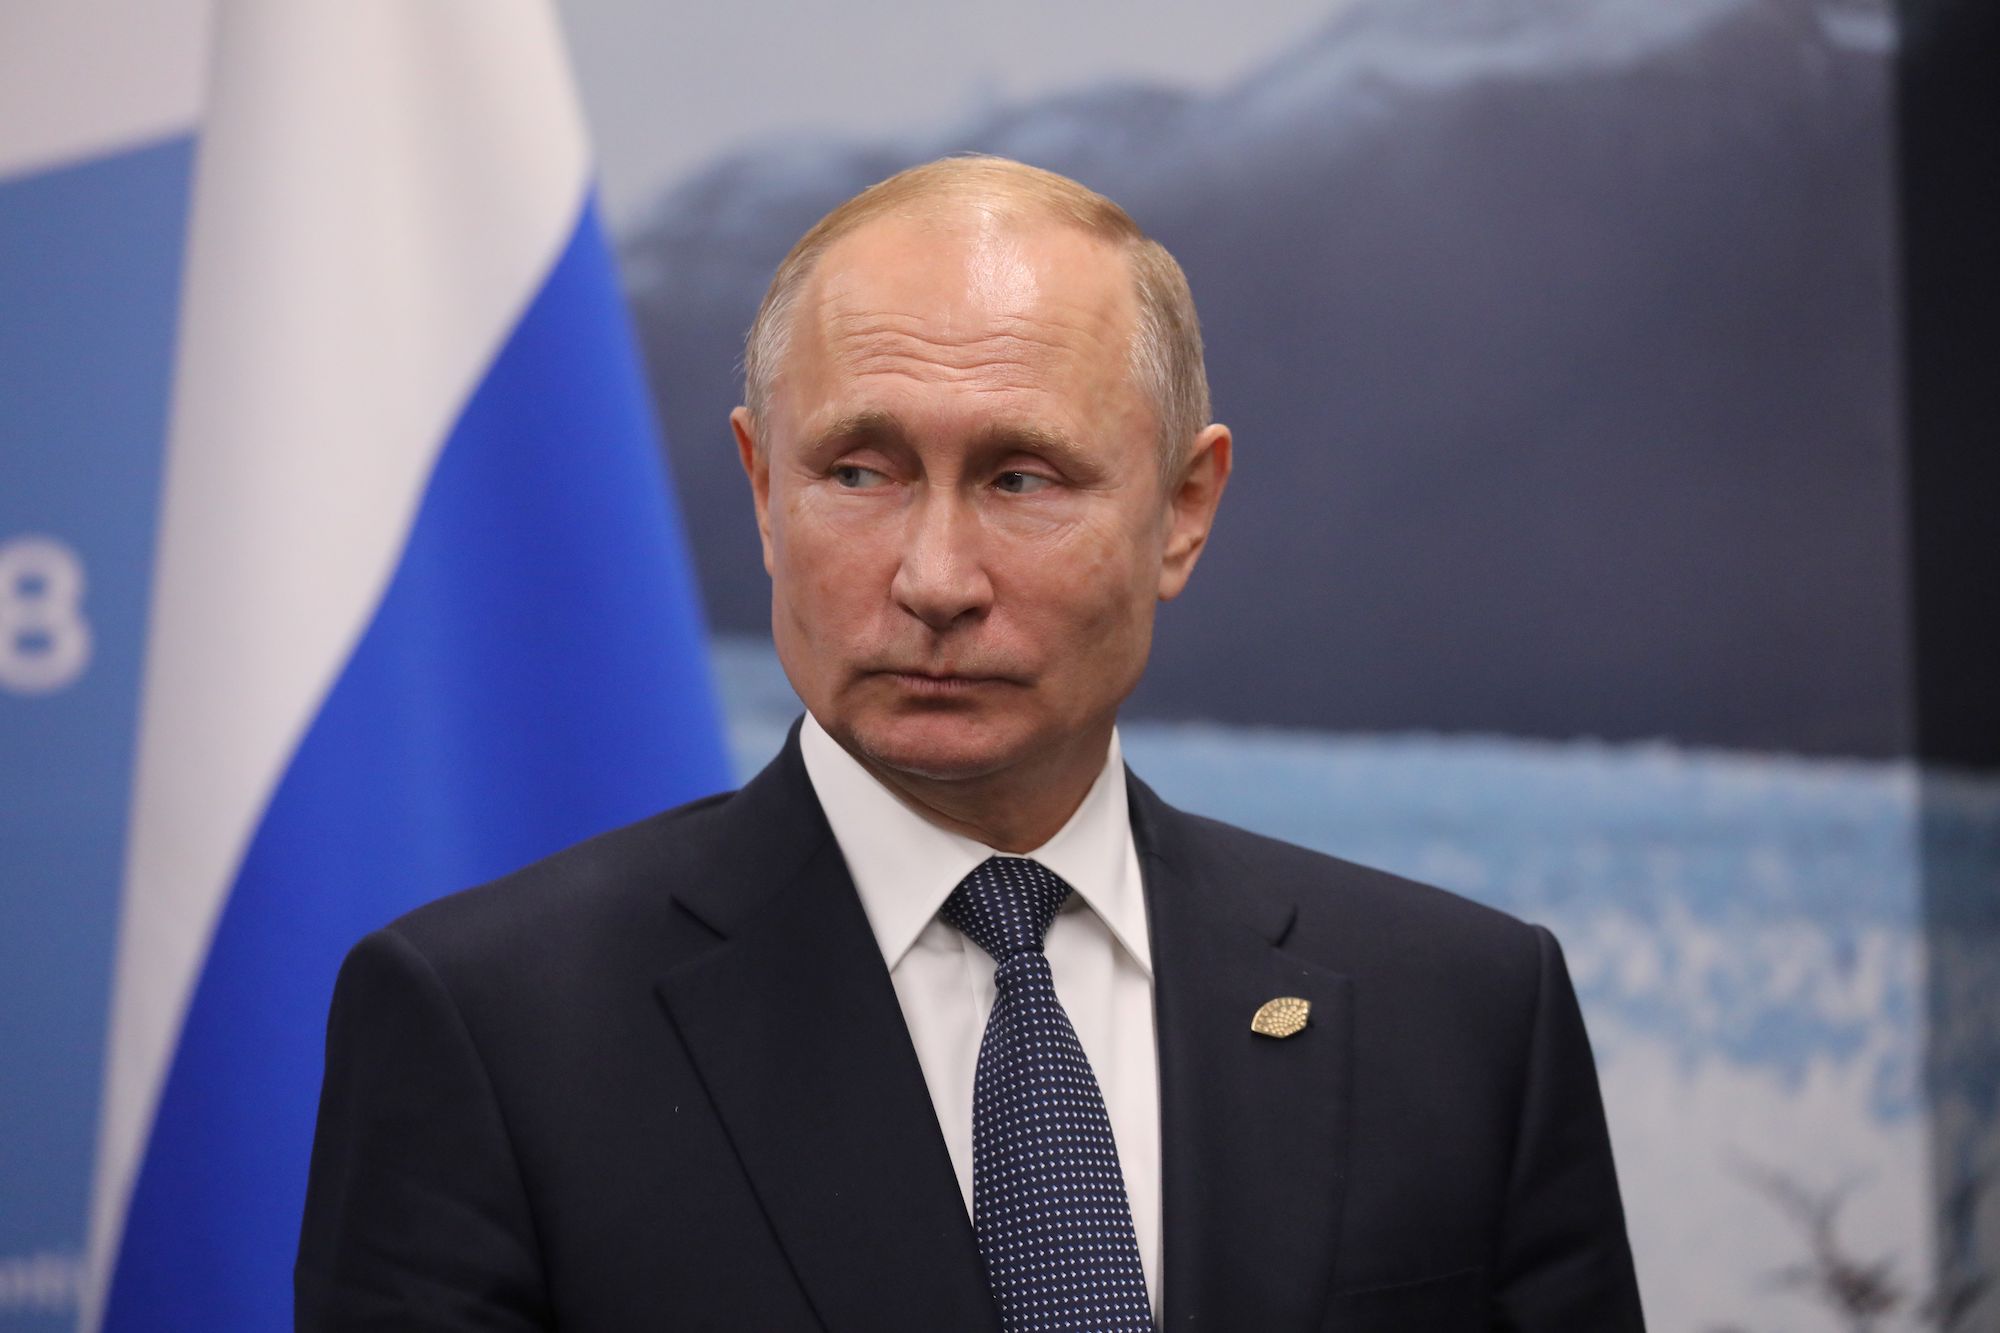 Russian President Vladimir Putin is seen during a meeting at the G20 Leaders' Summit in Buenos Aires, on November 30, 2018.